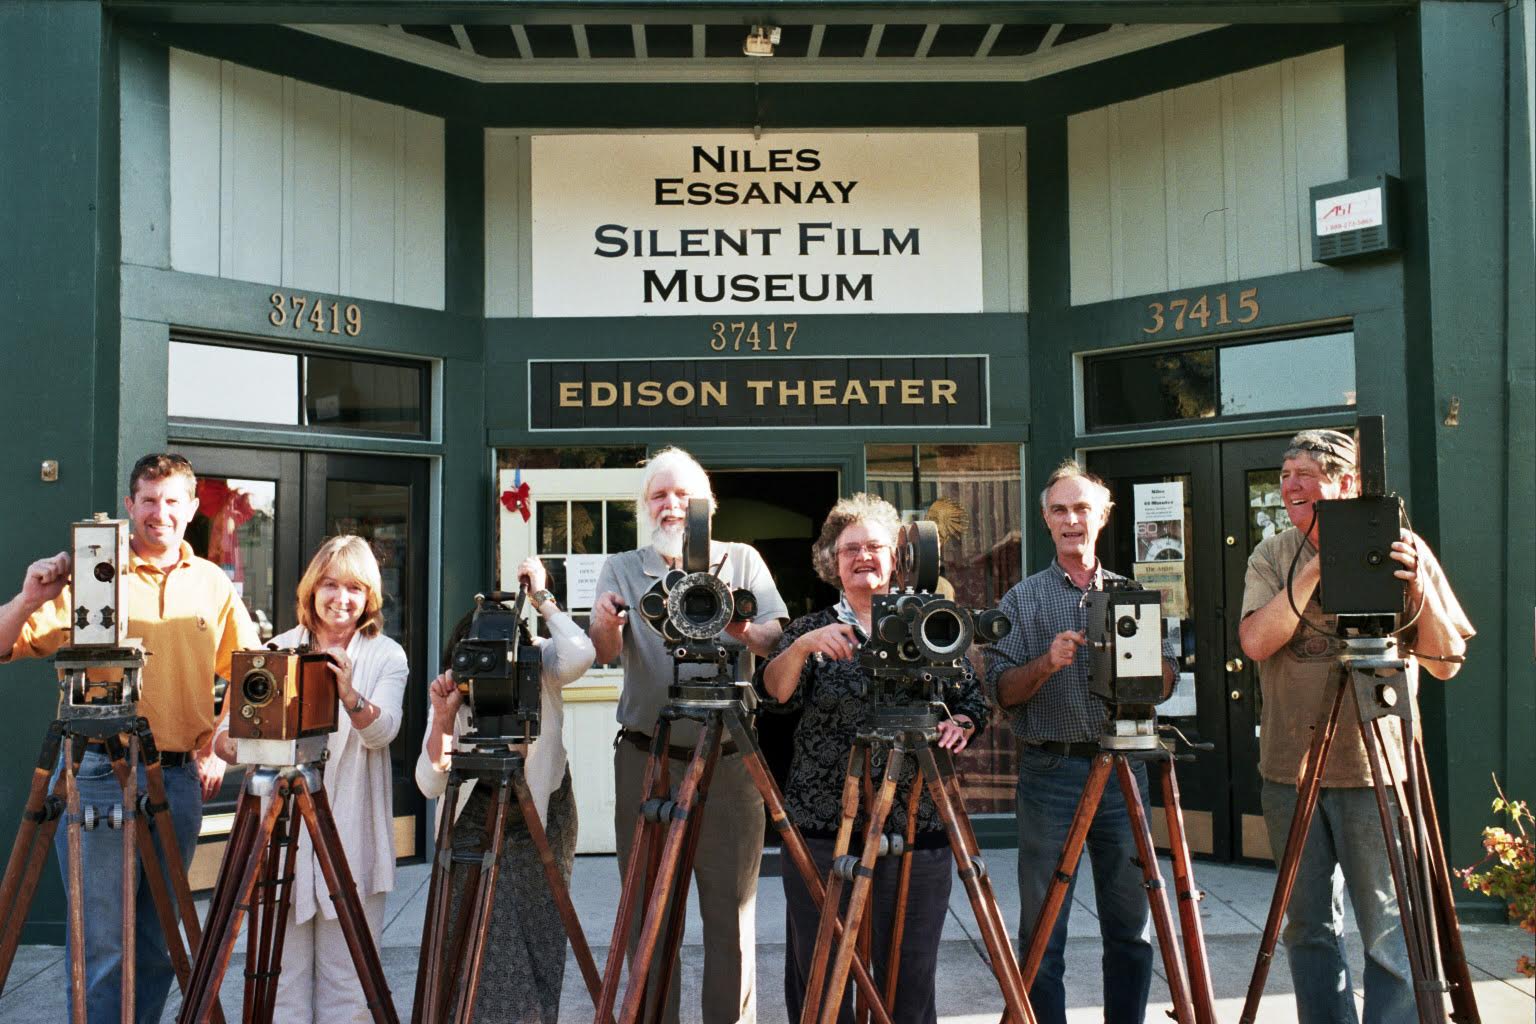 David Kiehn (second from right) and others, showing some of the Niles Essanay Silent Film Museum's silent-era camera equipment